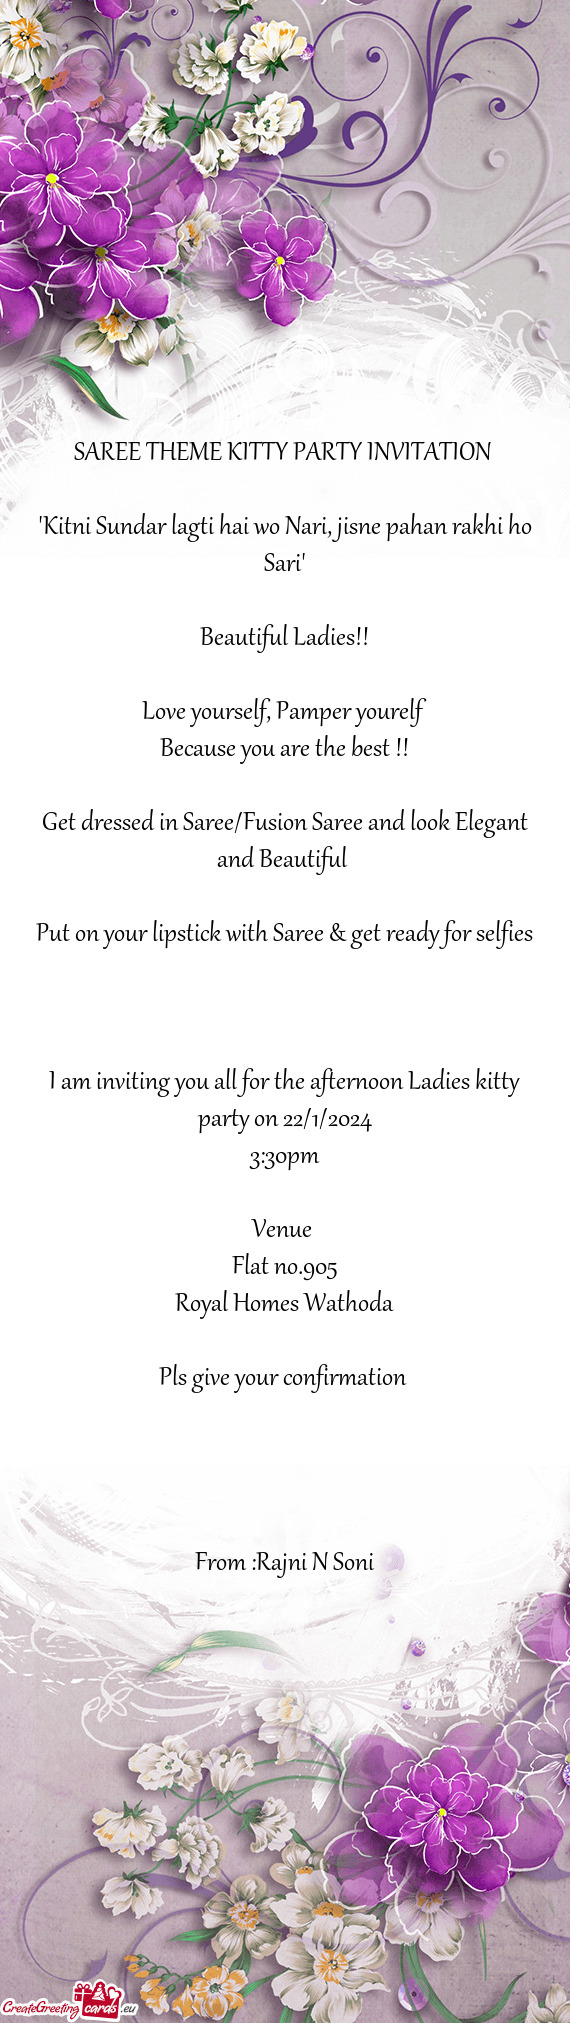 I am inviting you all for the afternoon Ladies kitty party on 22/1/2024